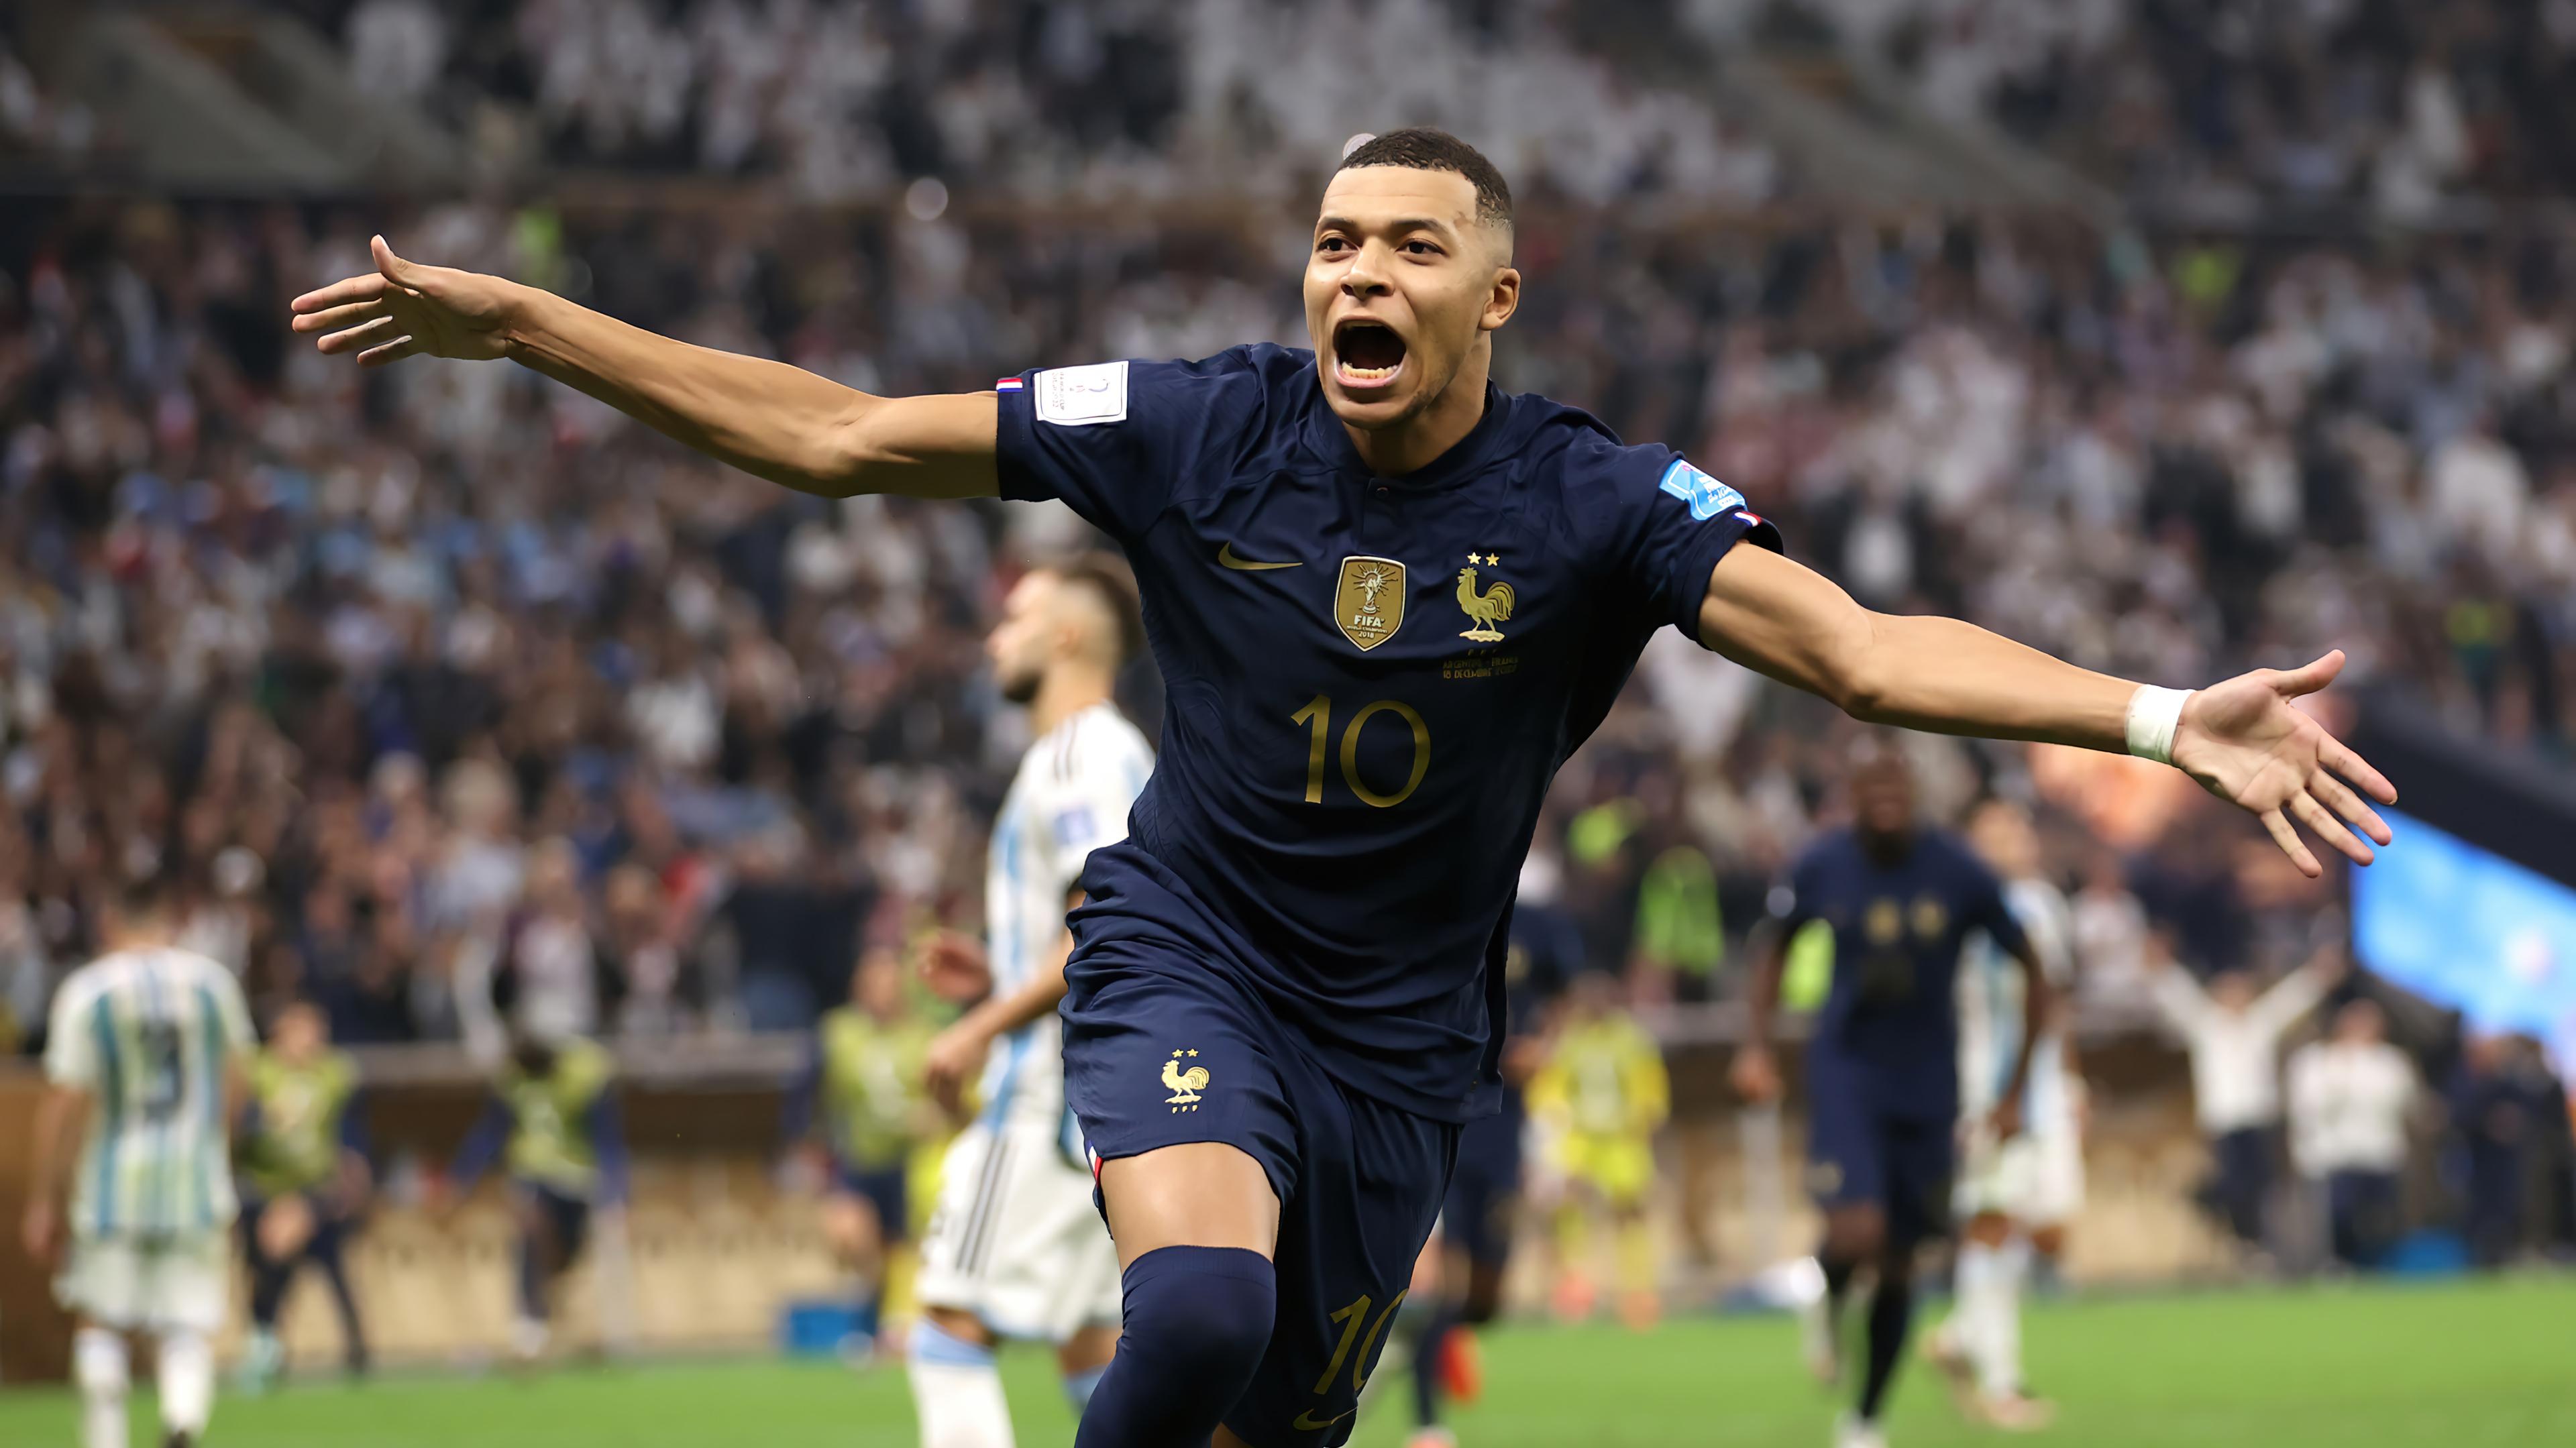 Download wallpapers FIFA World Cup 2018 Champion, 4k, FIFA World Cup 2018,  WINNER 2018 FIFA World Cup, Russia 2018, Soccer World Cup, France football  team for desktop free. Pictures for desktop free